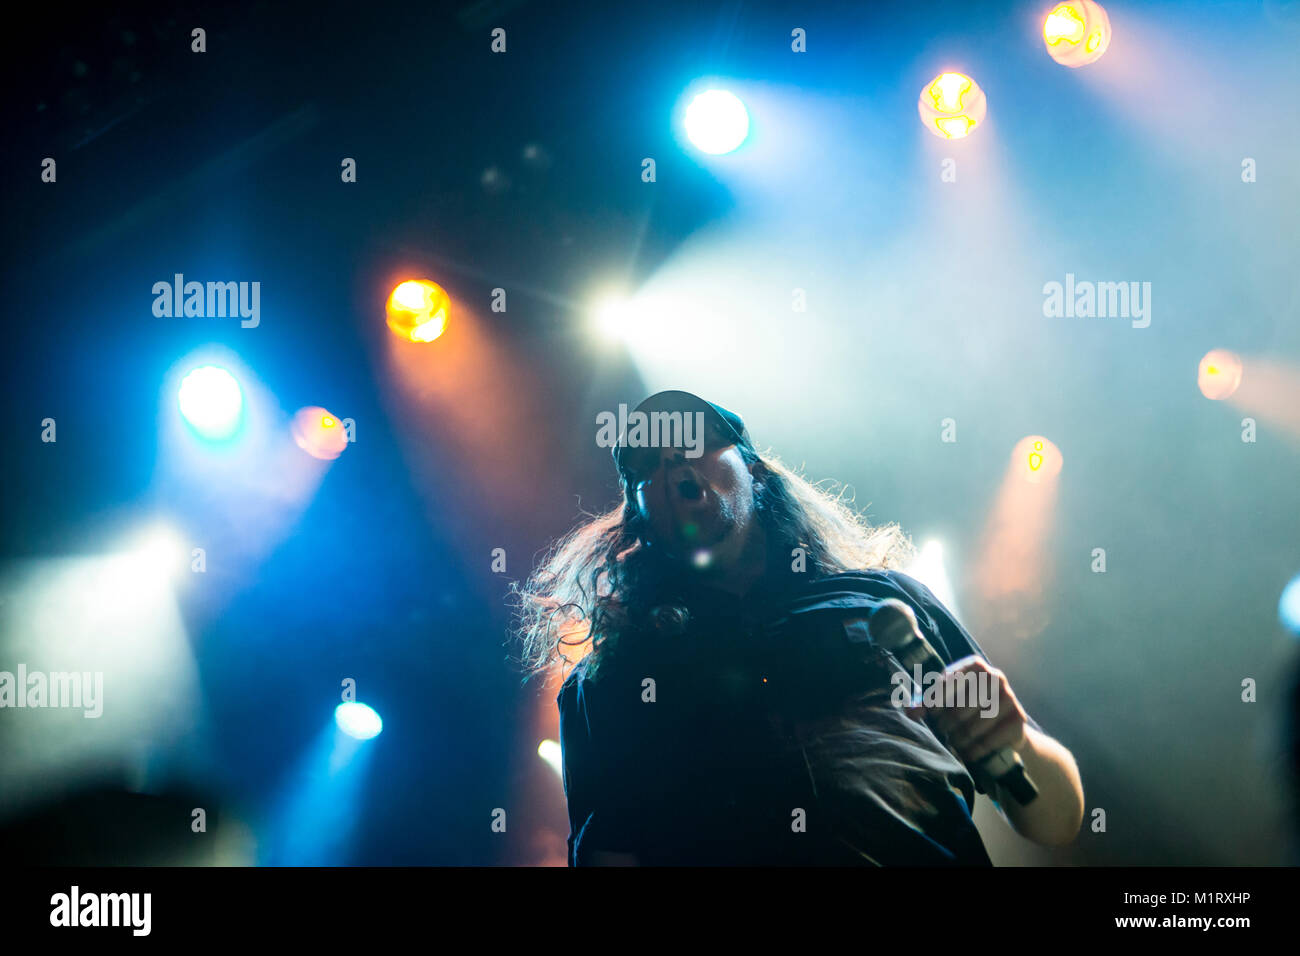 The Norwegian progressive metal band In the Woods performs a heavy metal festival Blastfest 2016 in Bergen. Here vocalist James Fogarty is seen live on stage. Norway, 18/02 2016. Stock Photo